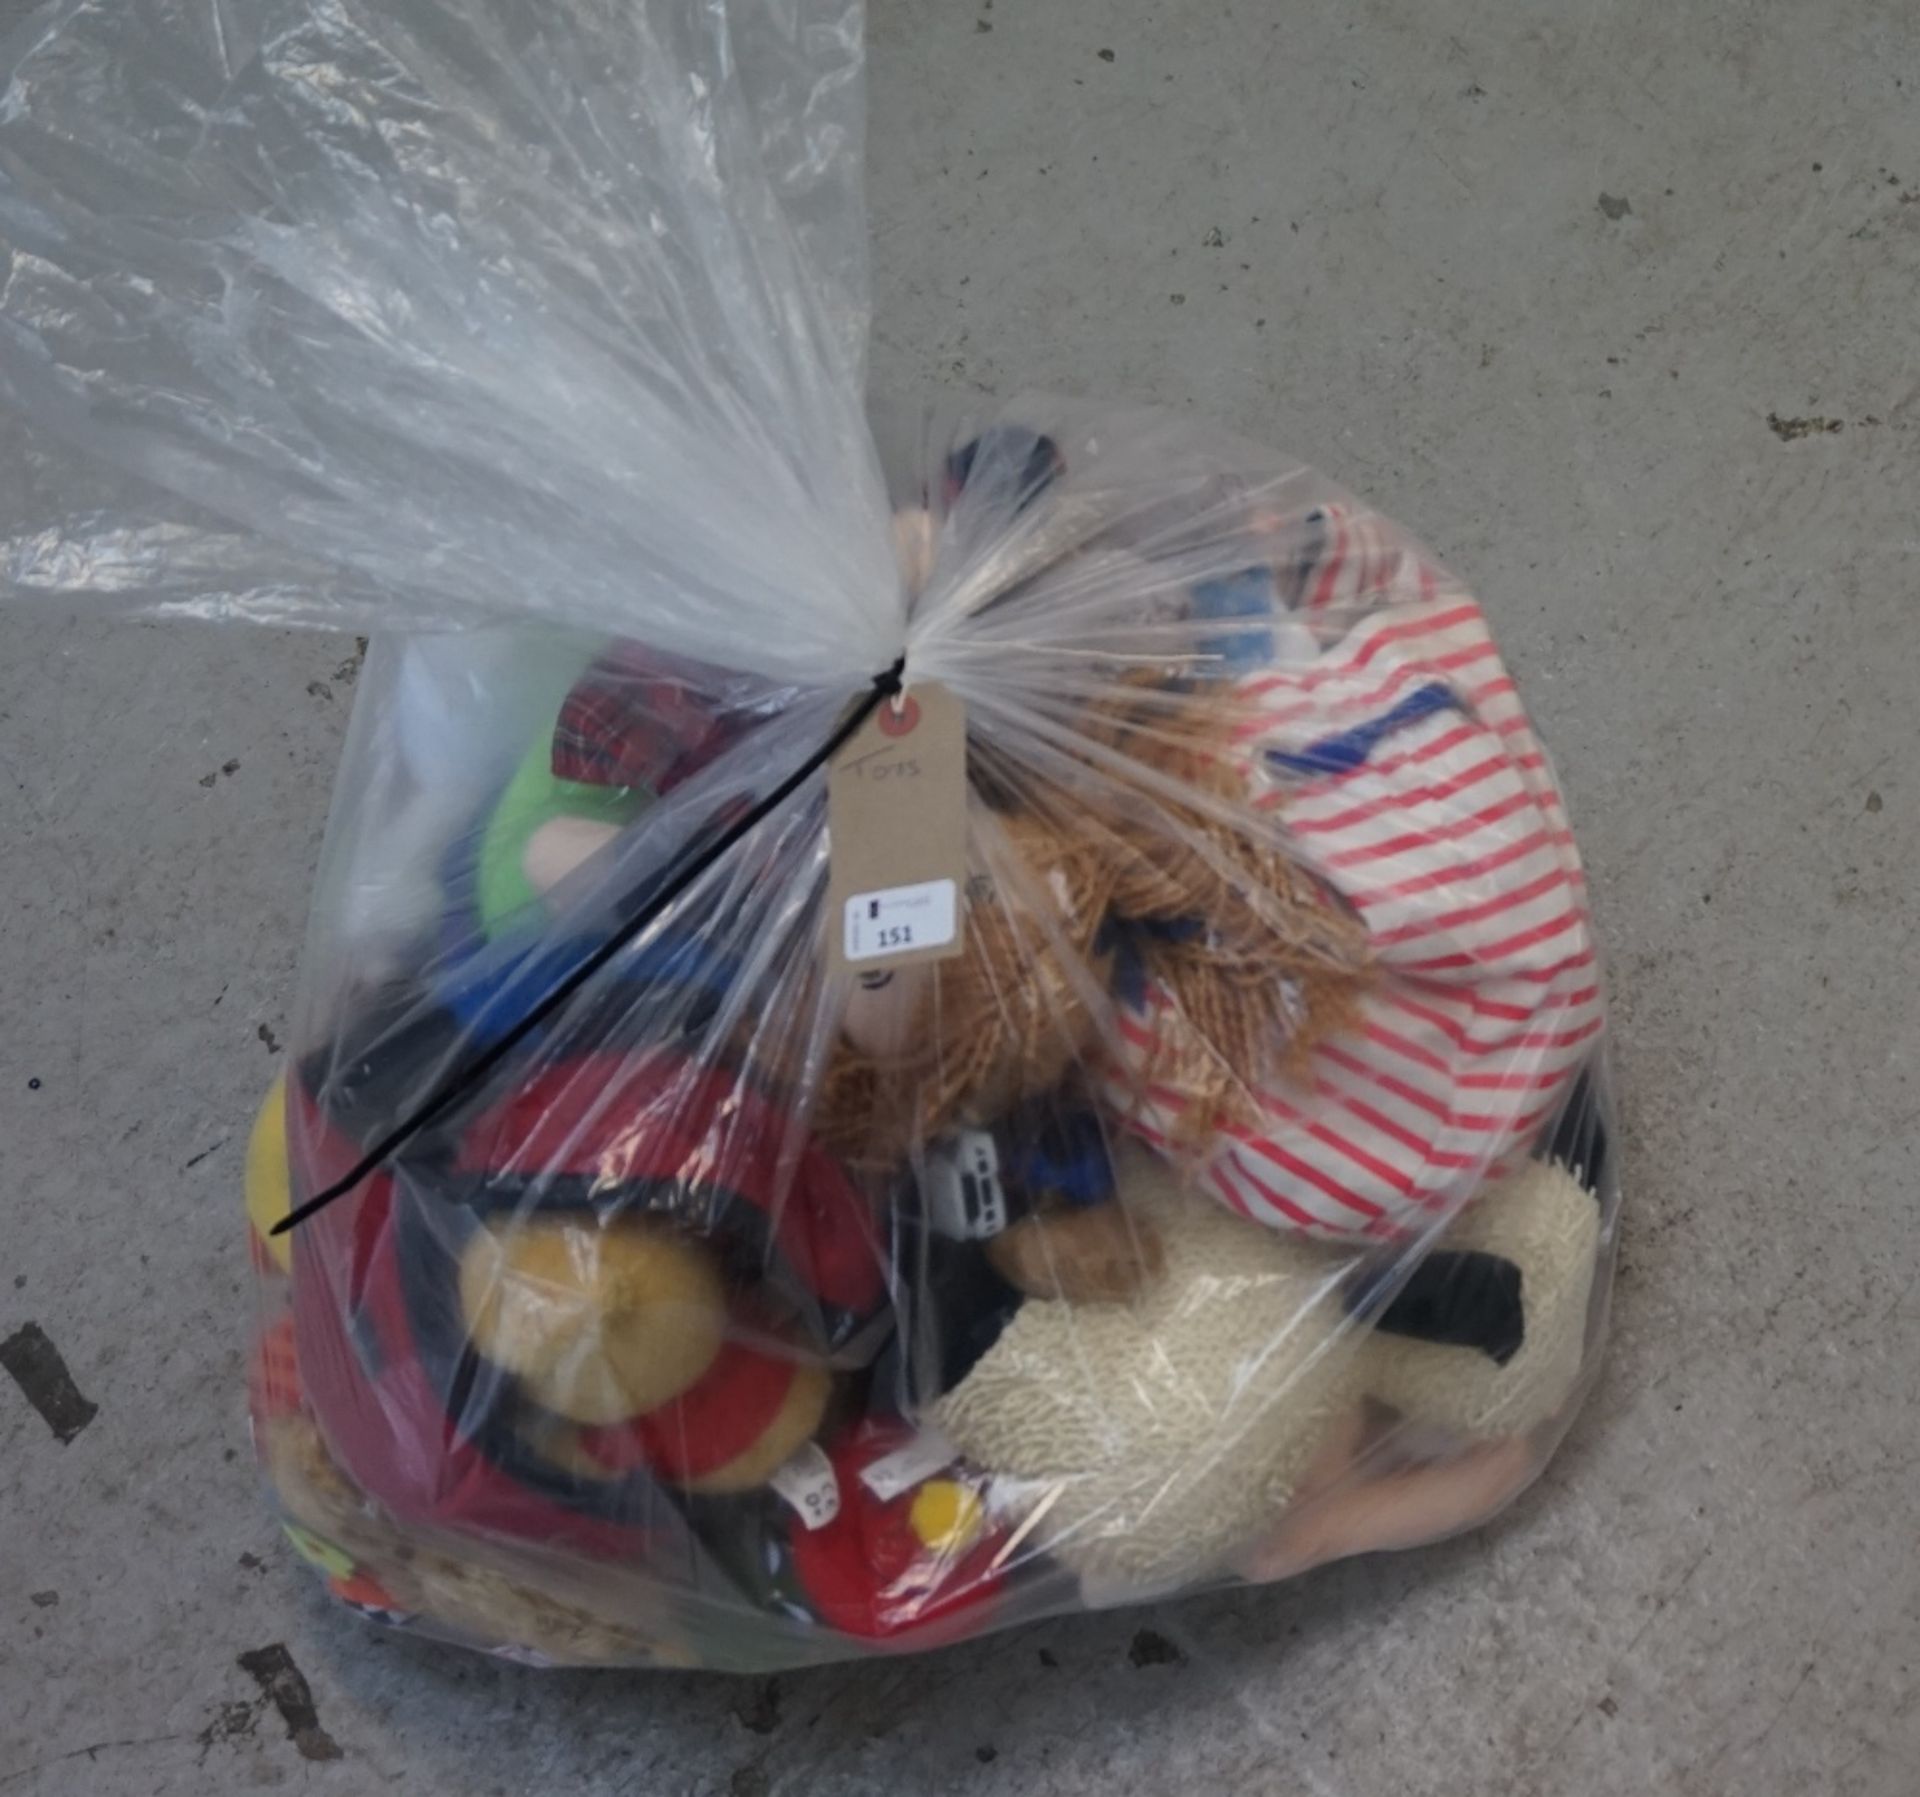 ONE BAG OF KID'S TOYS